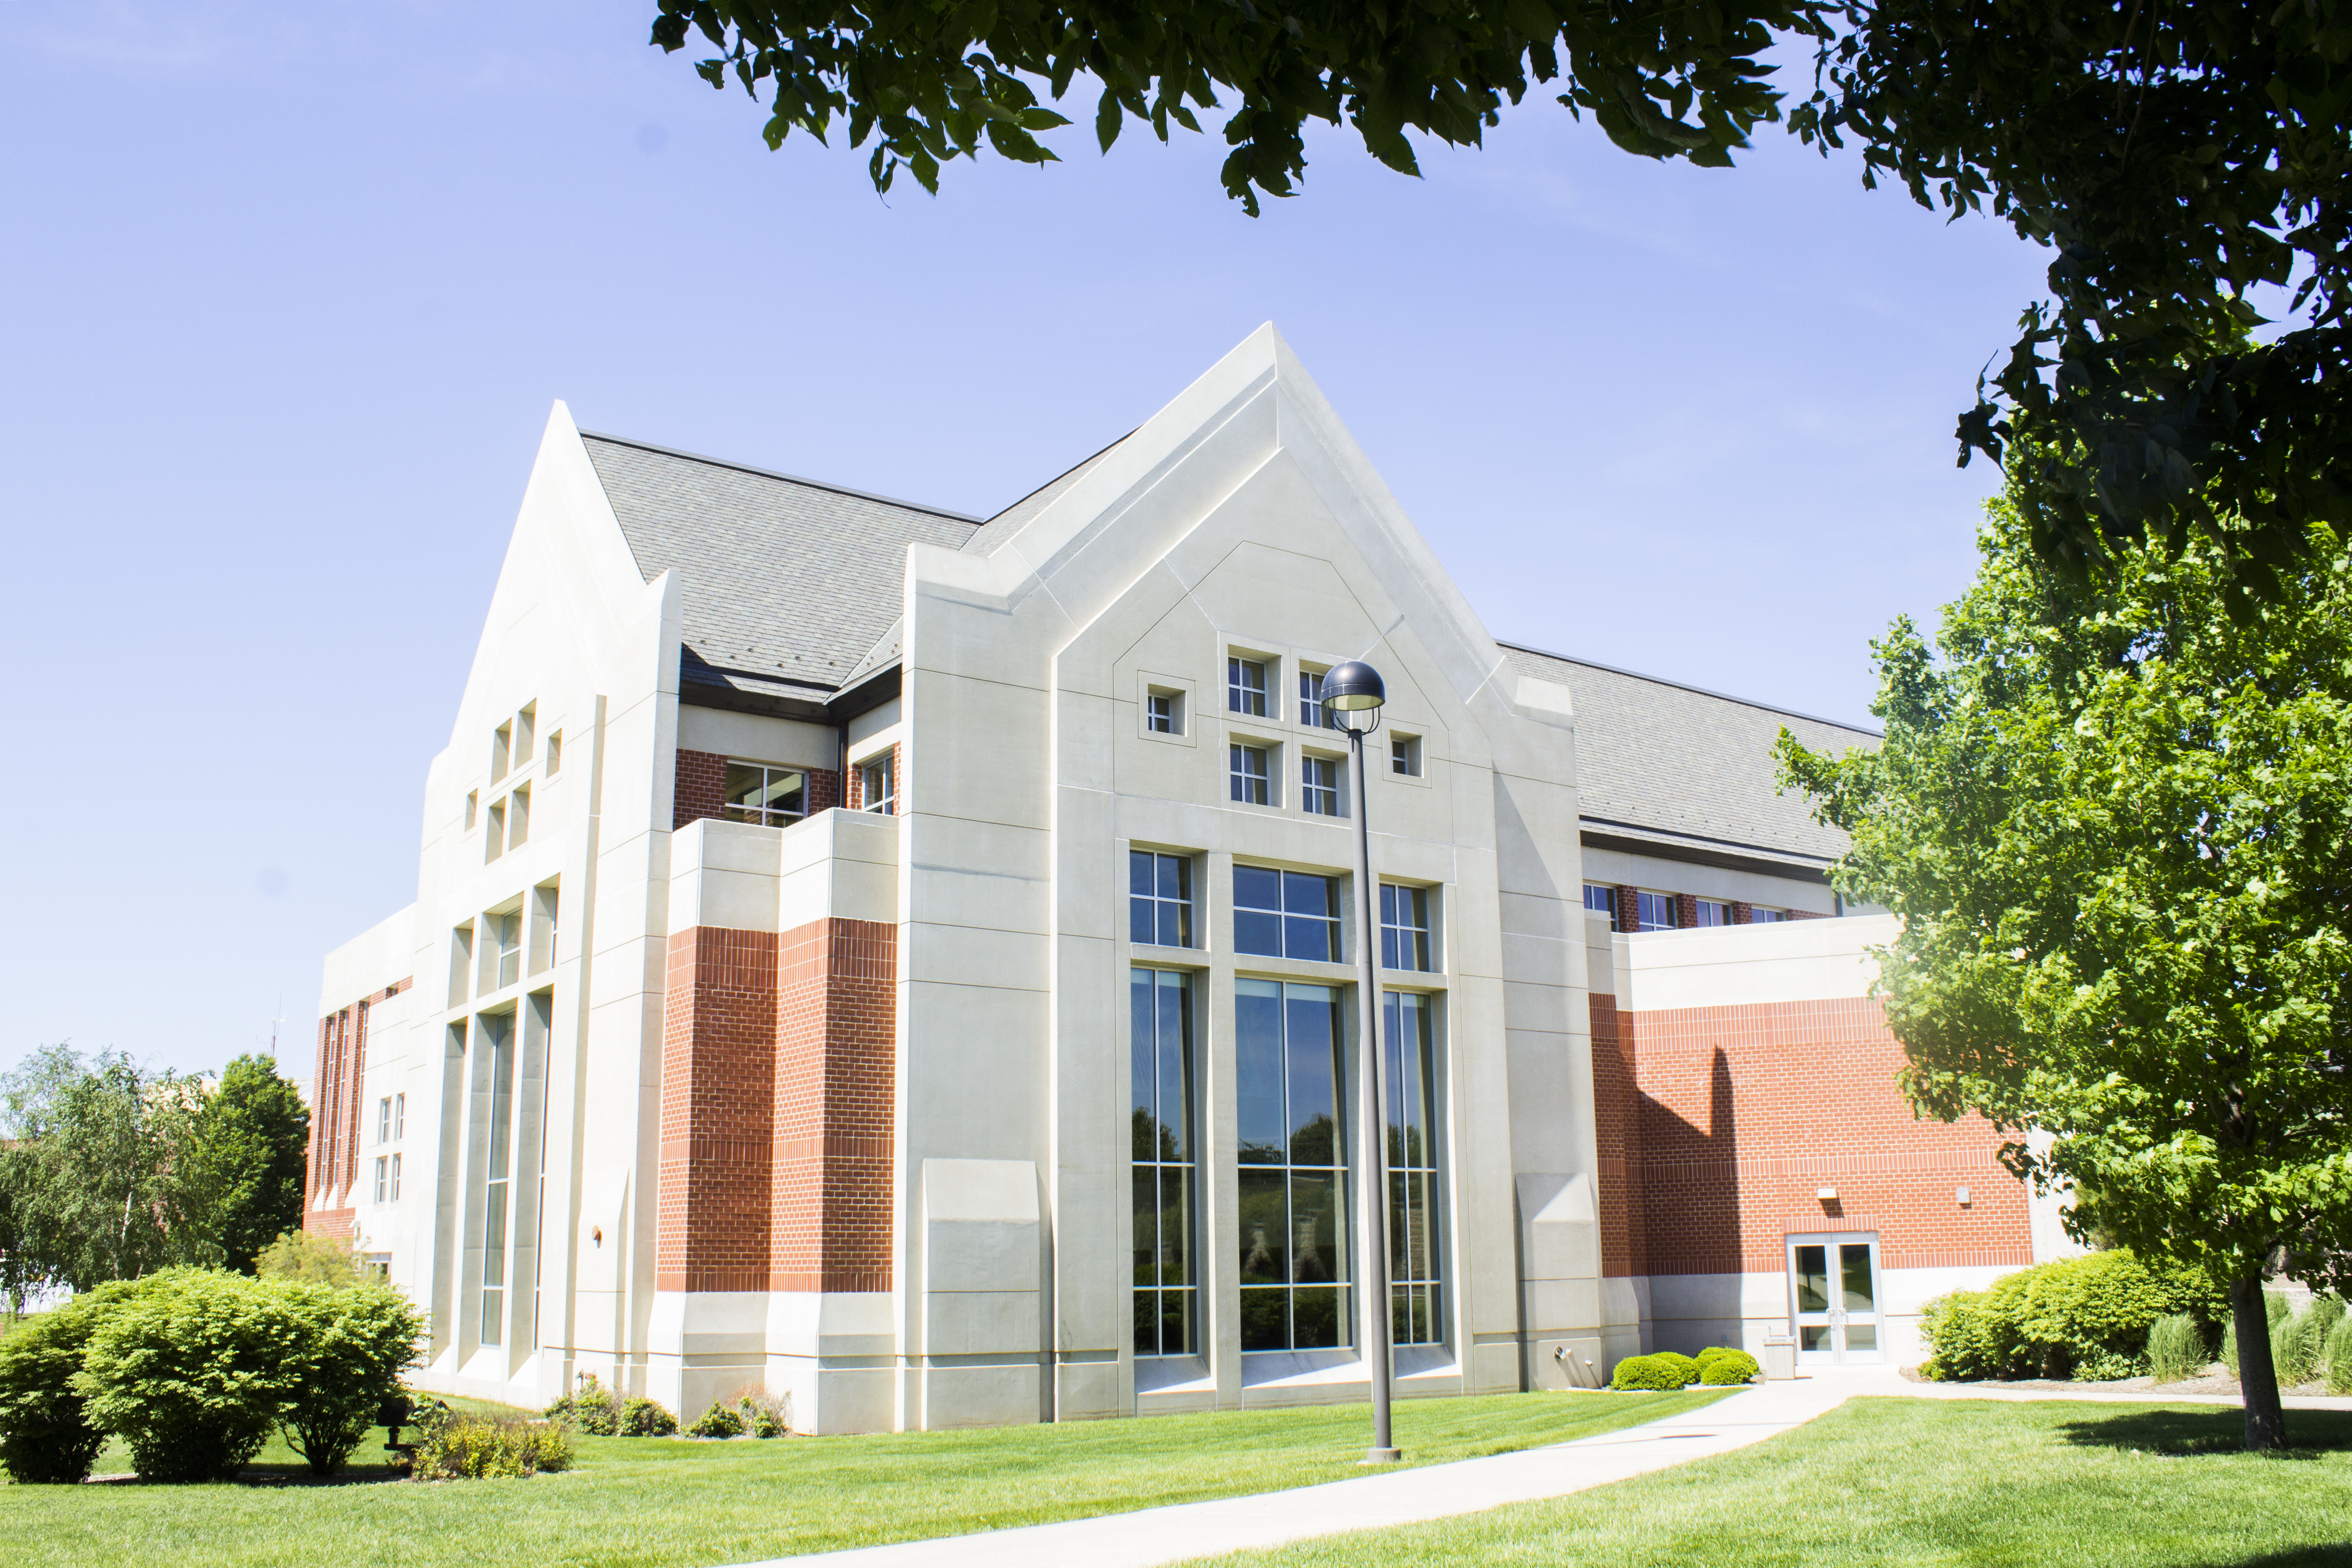 A picture of Dordt University's campus center on a sunny day